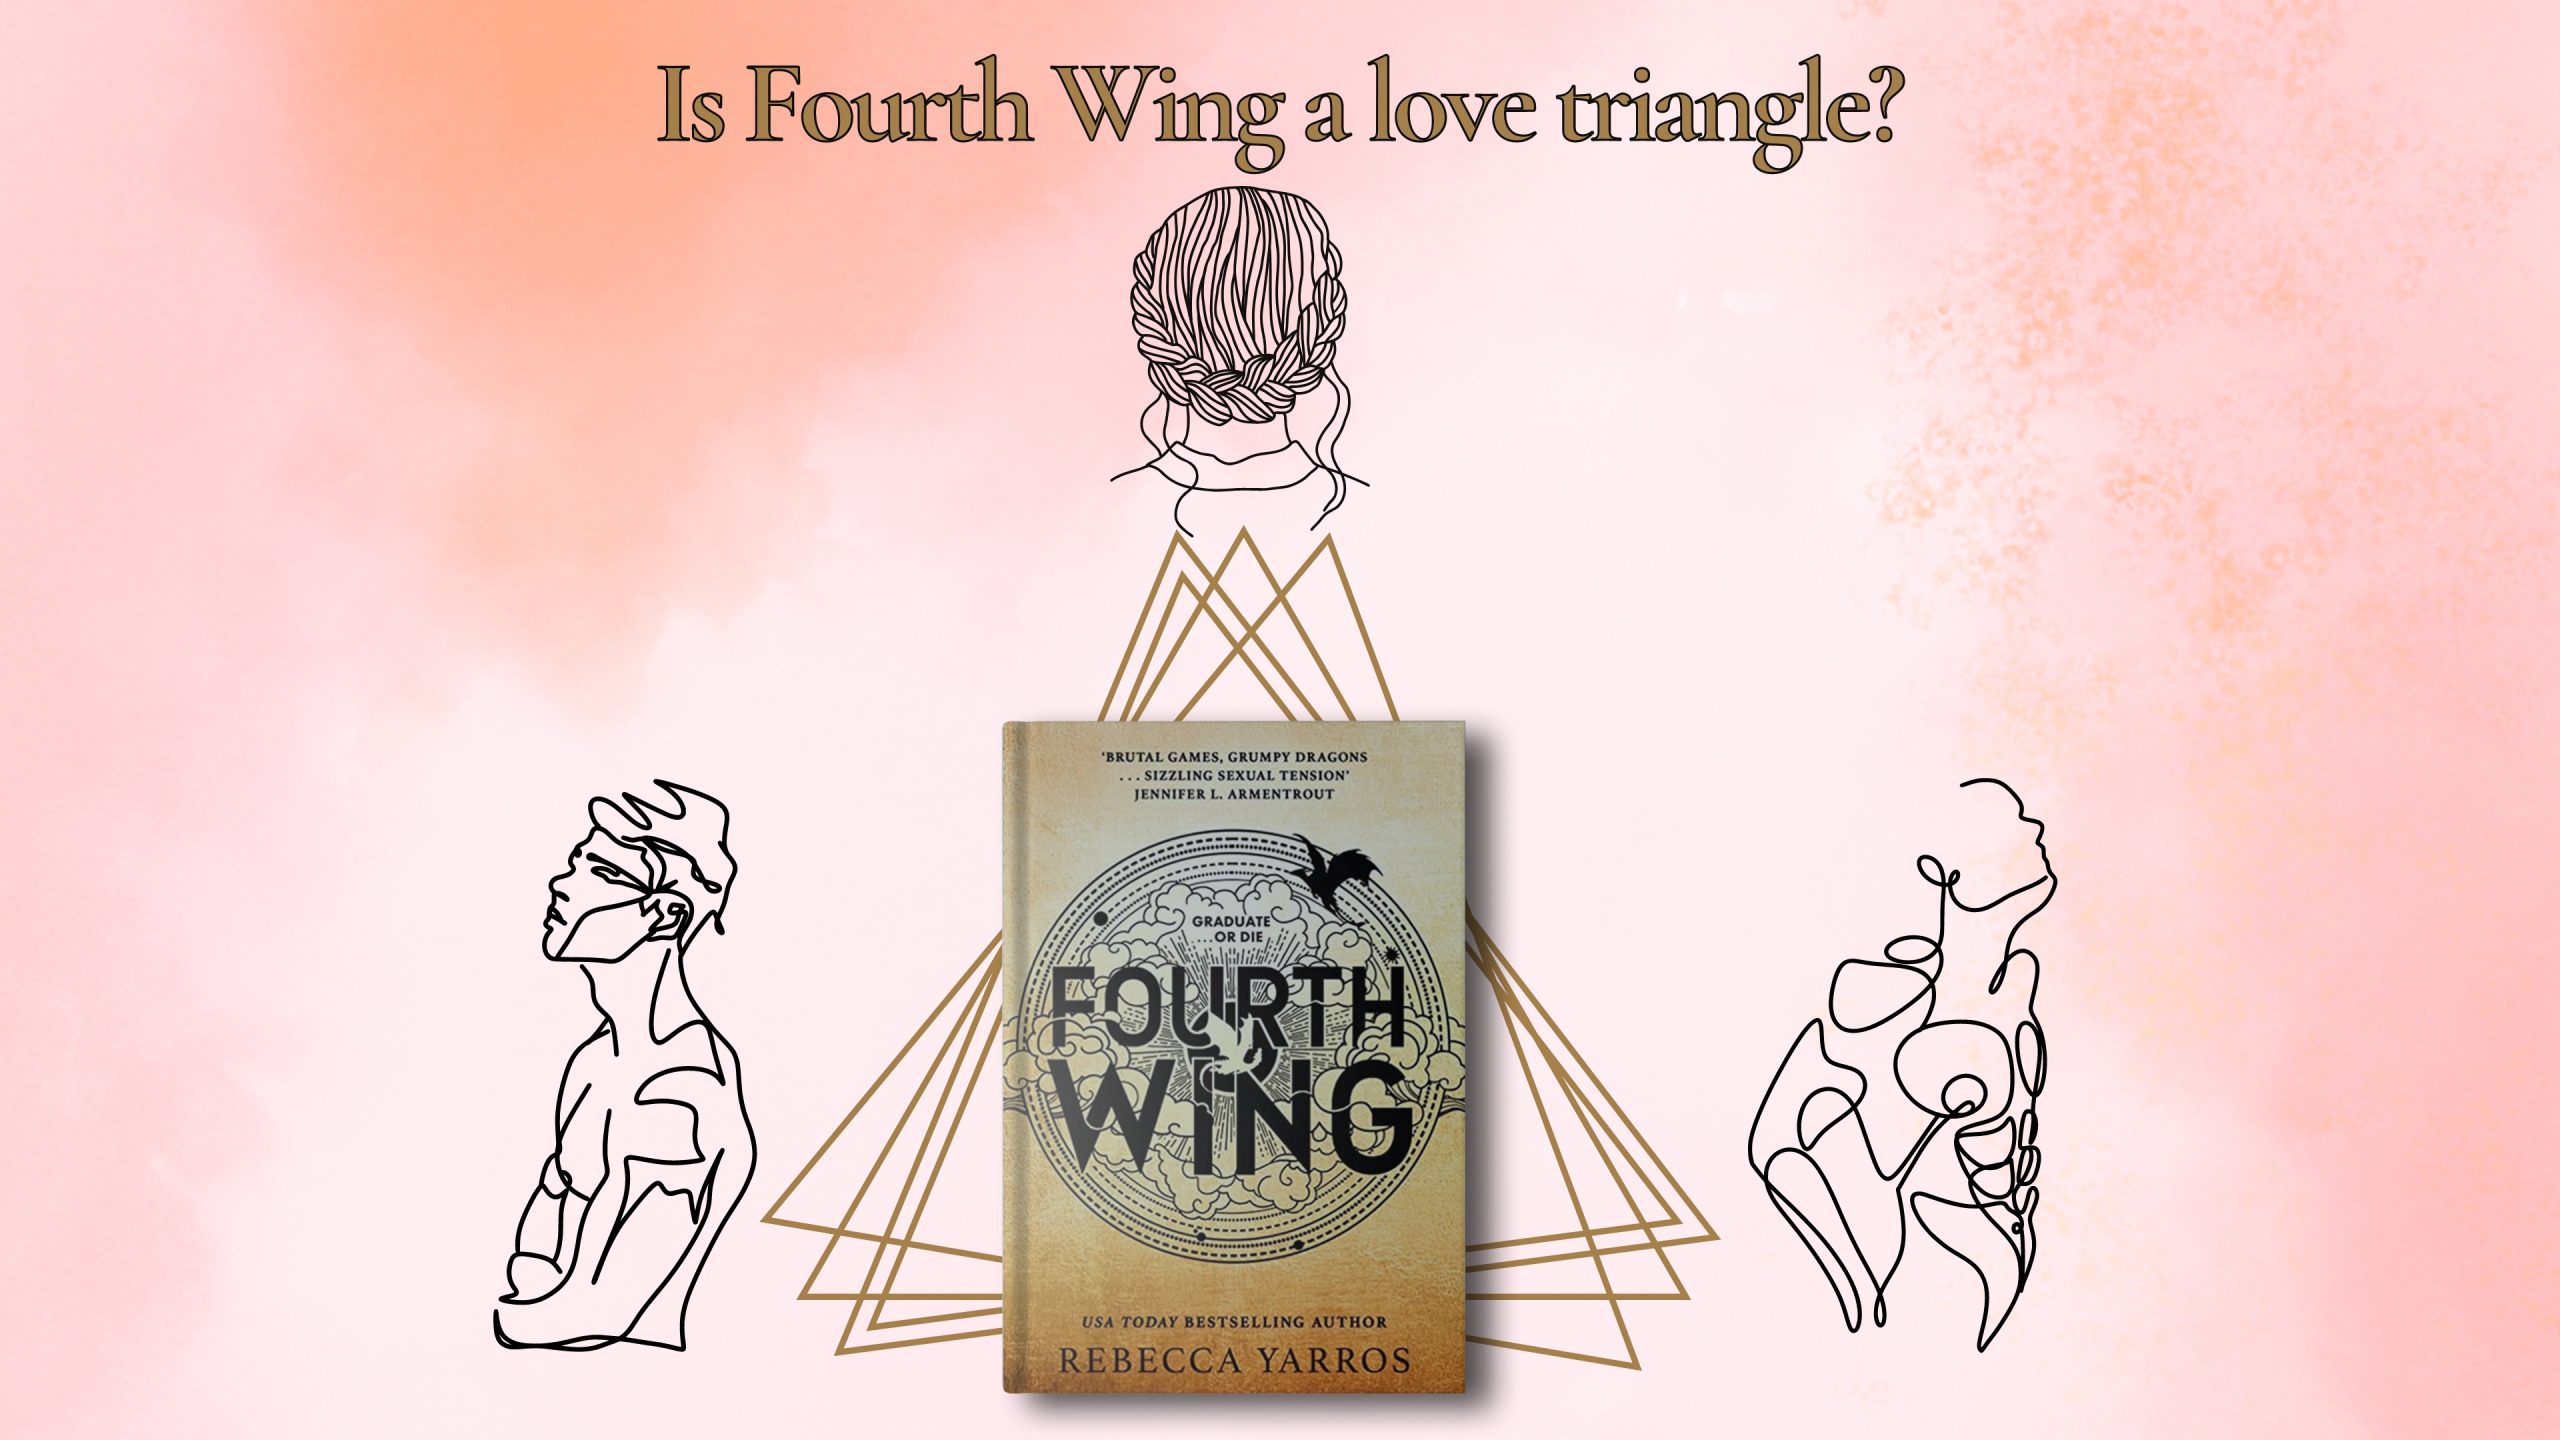 Is fourth wing a love triangle? Empyrean Series by Rebecca Yarros